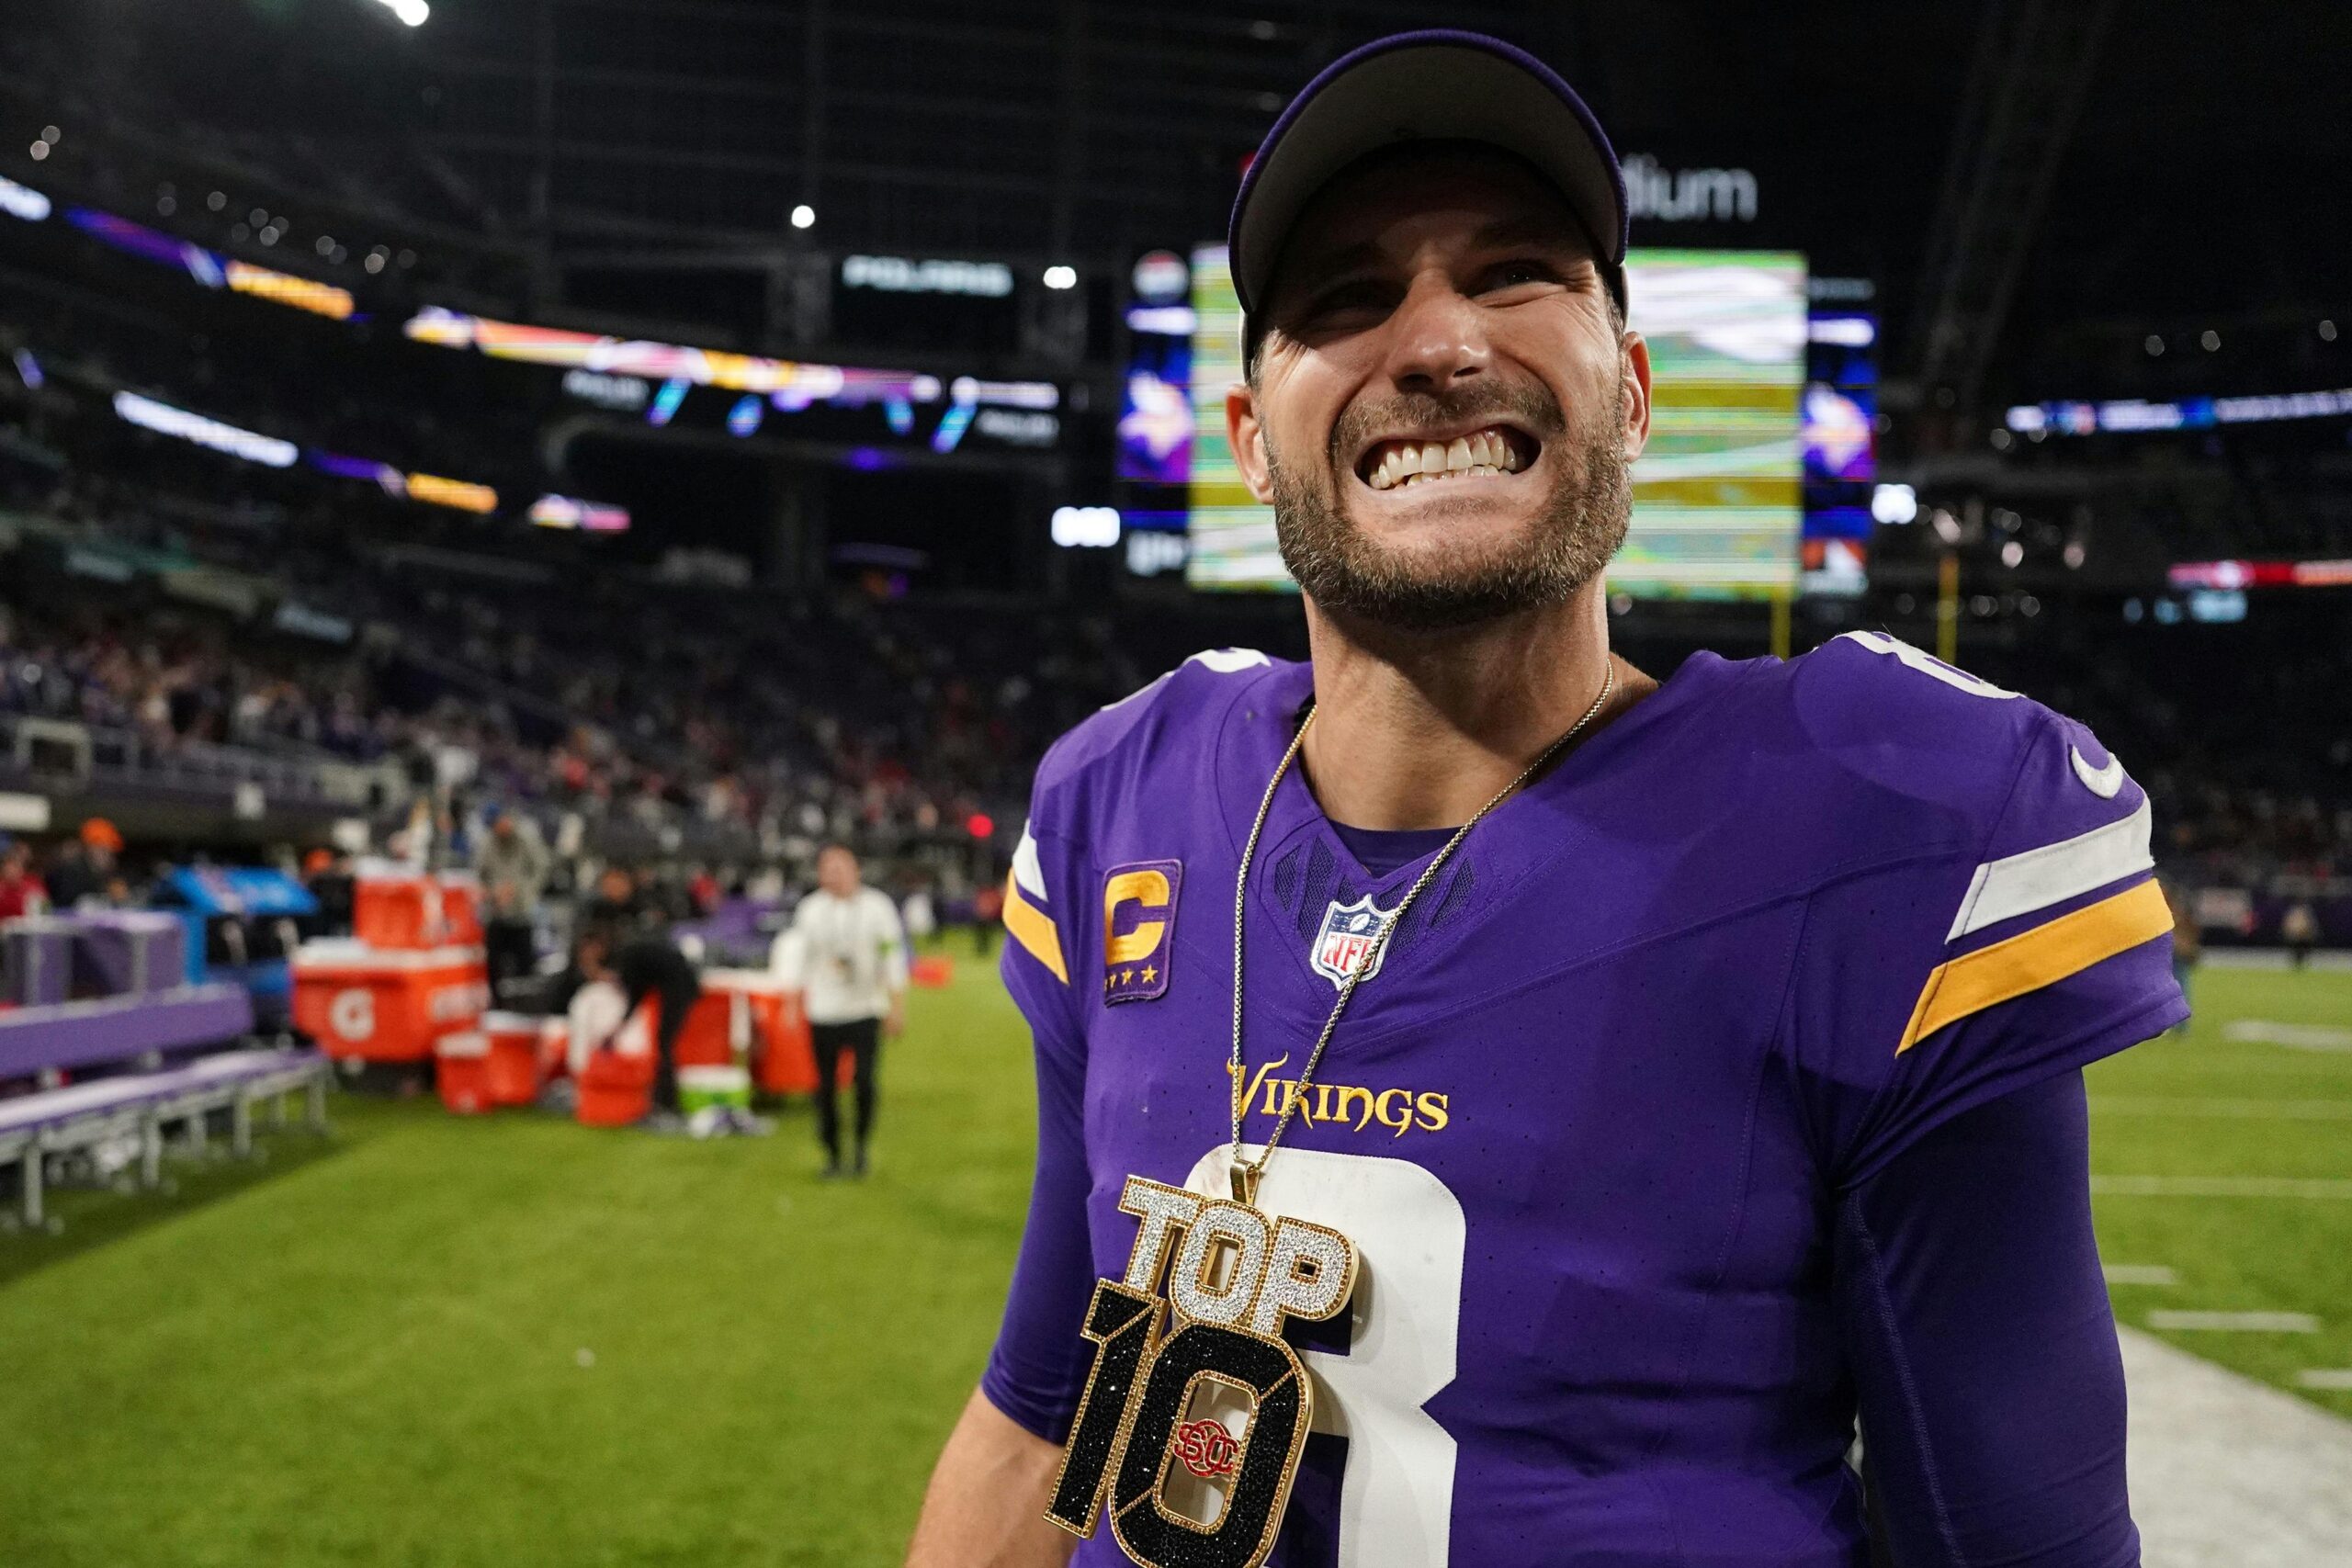 He is Back : Kirk Cousins Return stronger  after trade rumors The Atlanta Falcons are pleased to announce his arrival…